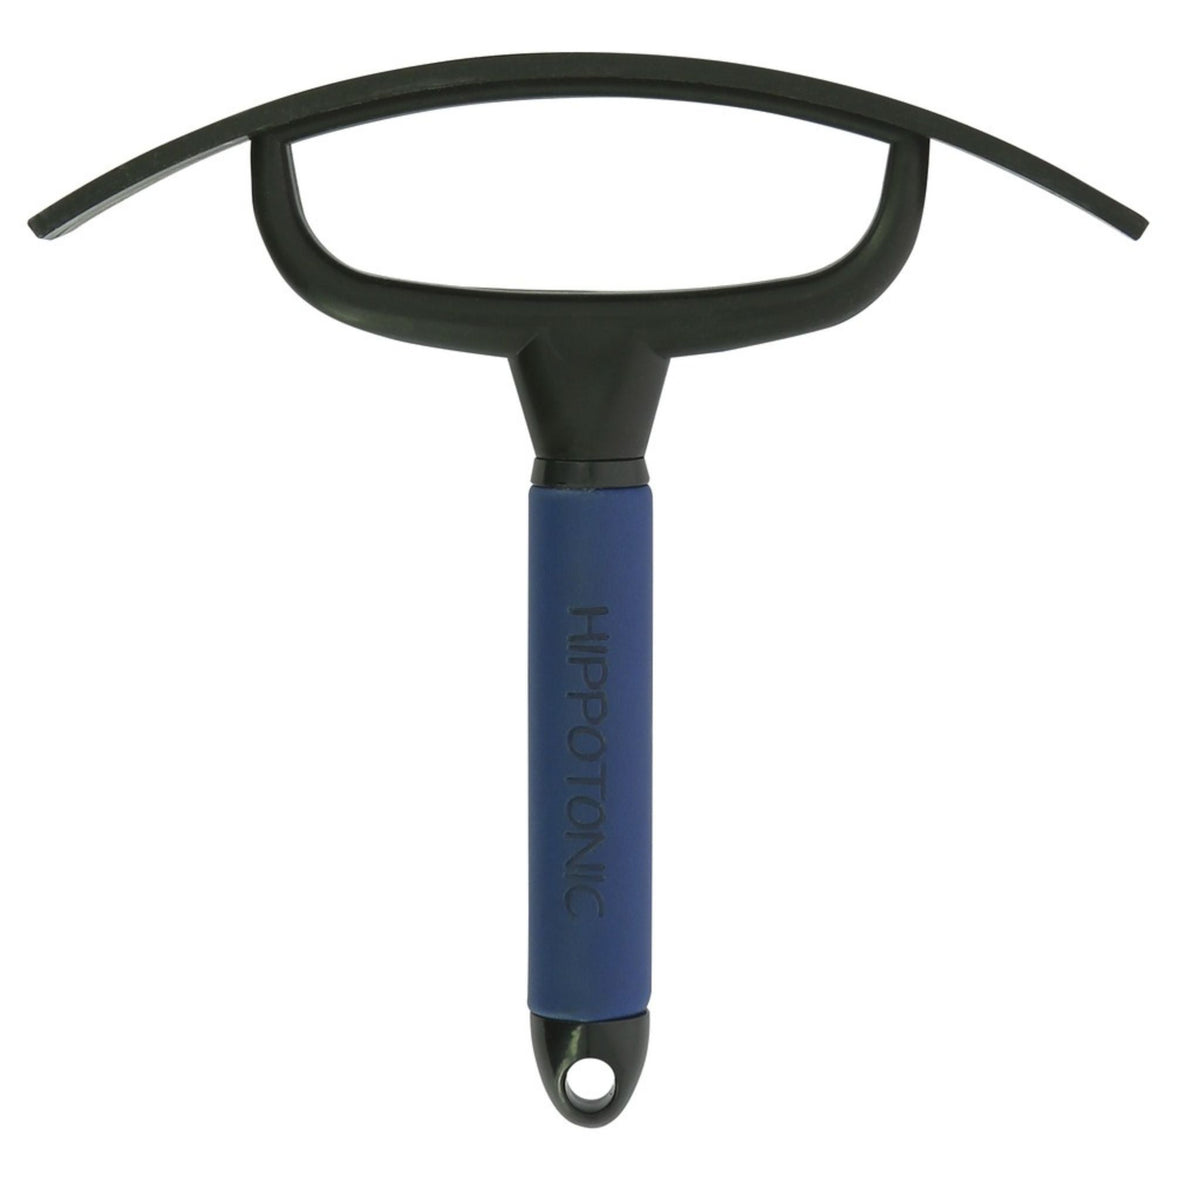 Black sweat scraper with a navy leather handle indented with “Hippotonic”.